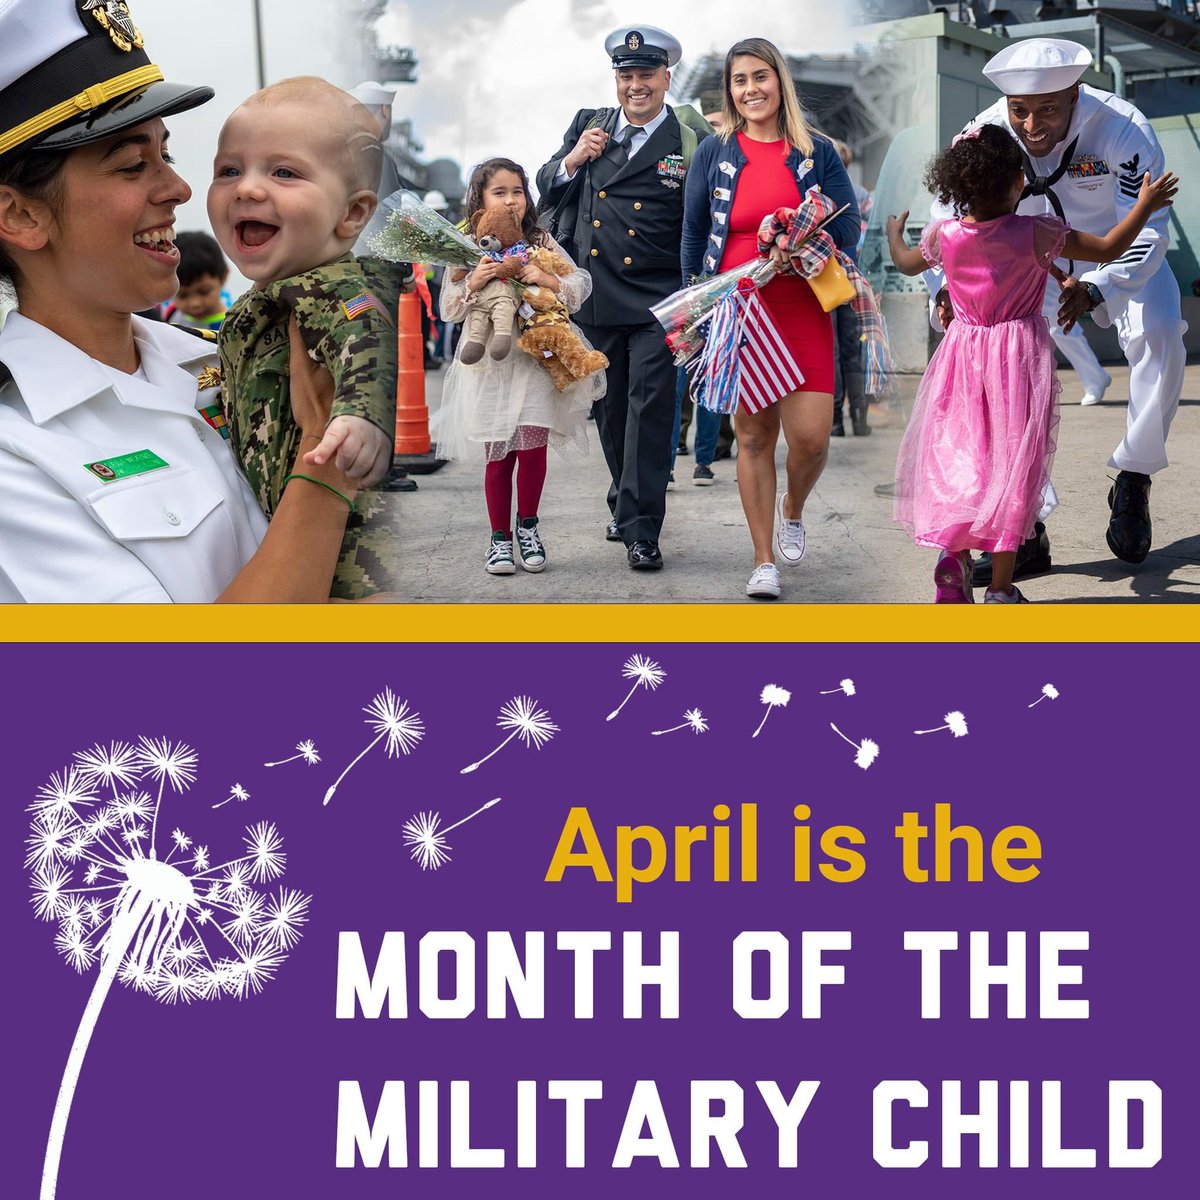 In celebration of #MonthOfTheMilitaryChild, the U.S. Navy applauds the resilience of military children everywhere. From adapting to frequent moves and dealing with family separations during deployment, they are some of the most adaptable and strong members of our Navy family. We